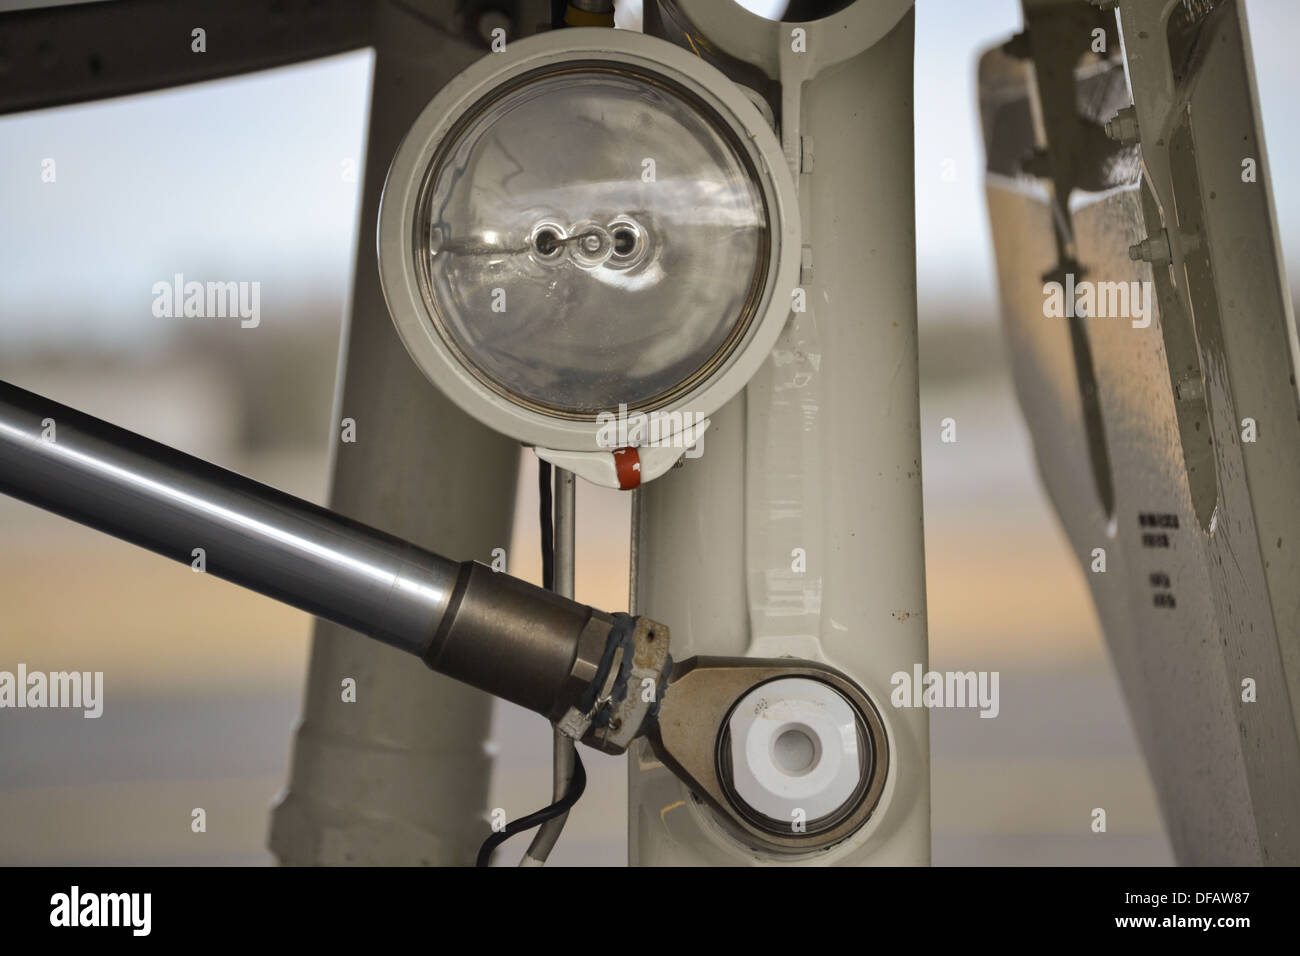 Aircraft landing light mounted on main landing gear of private general aviation aircraft Stock Photo